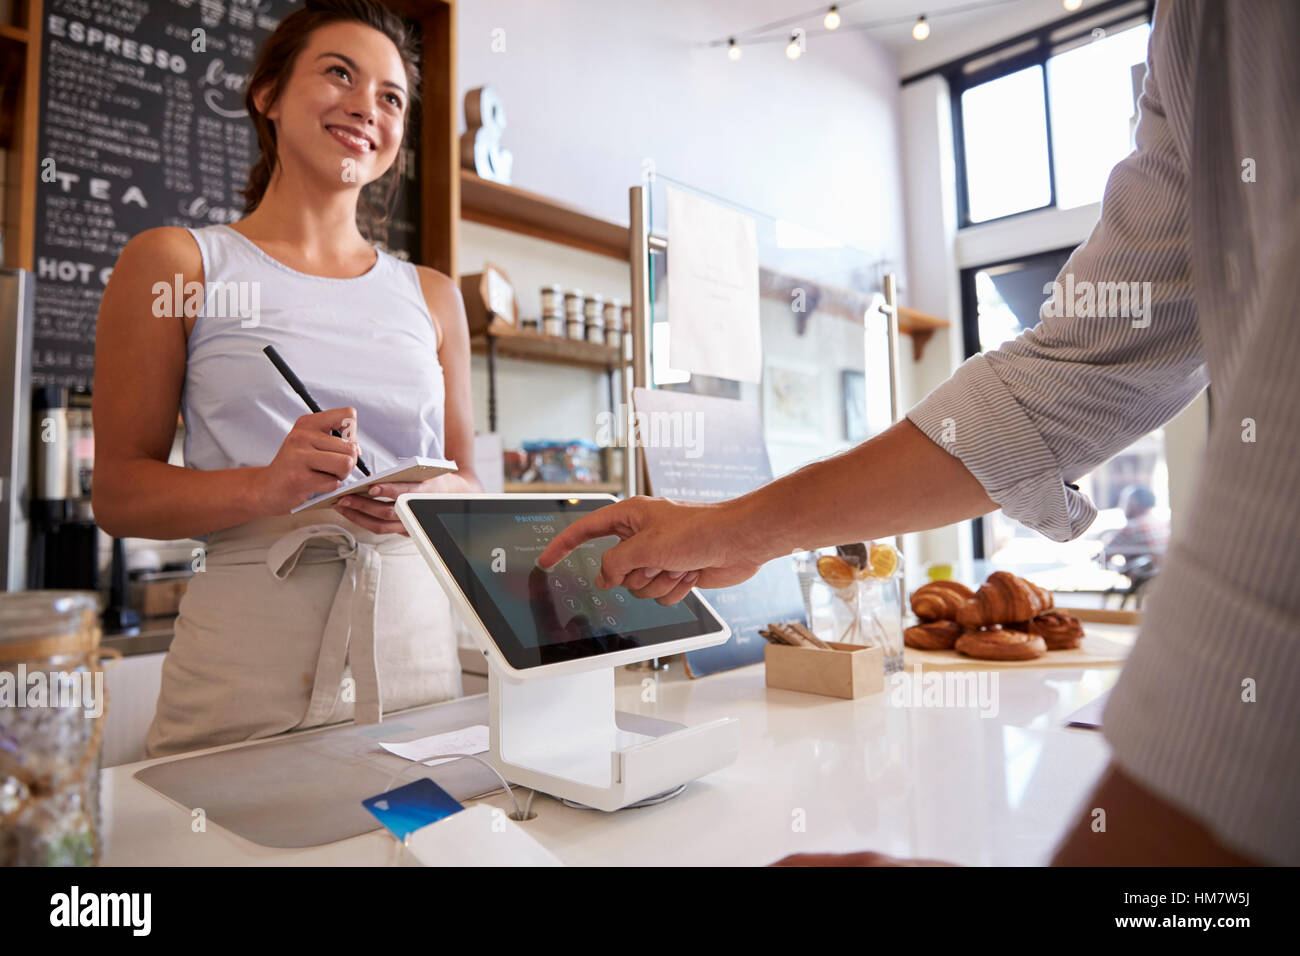 Customer using touch screen to make payment at a coffee shop Stock Photo